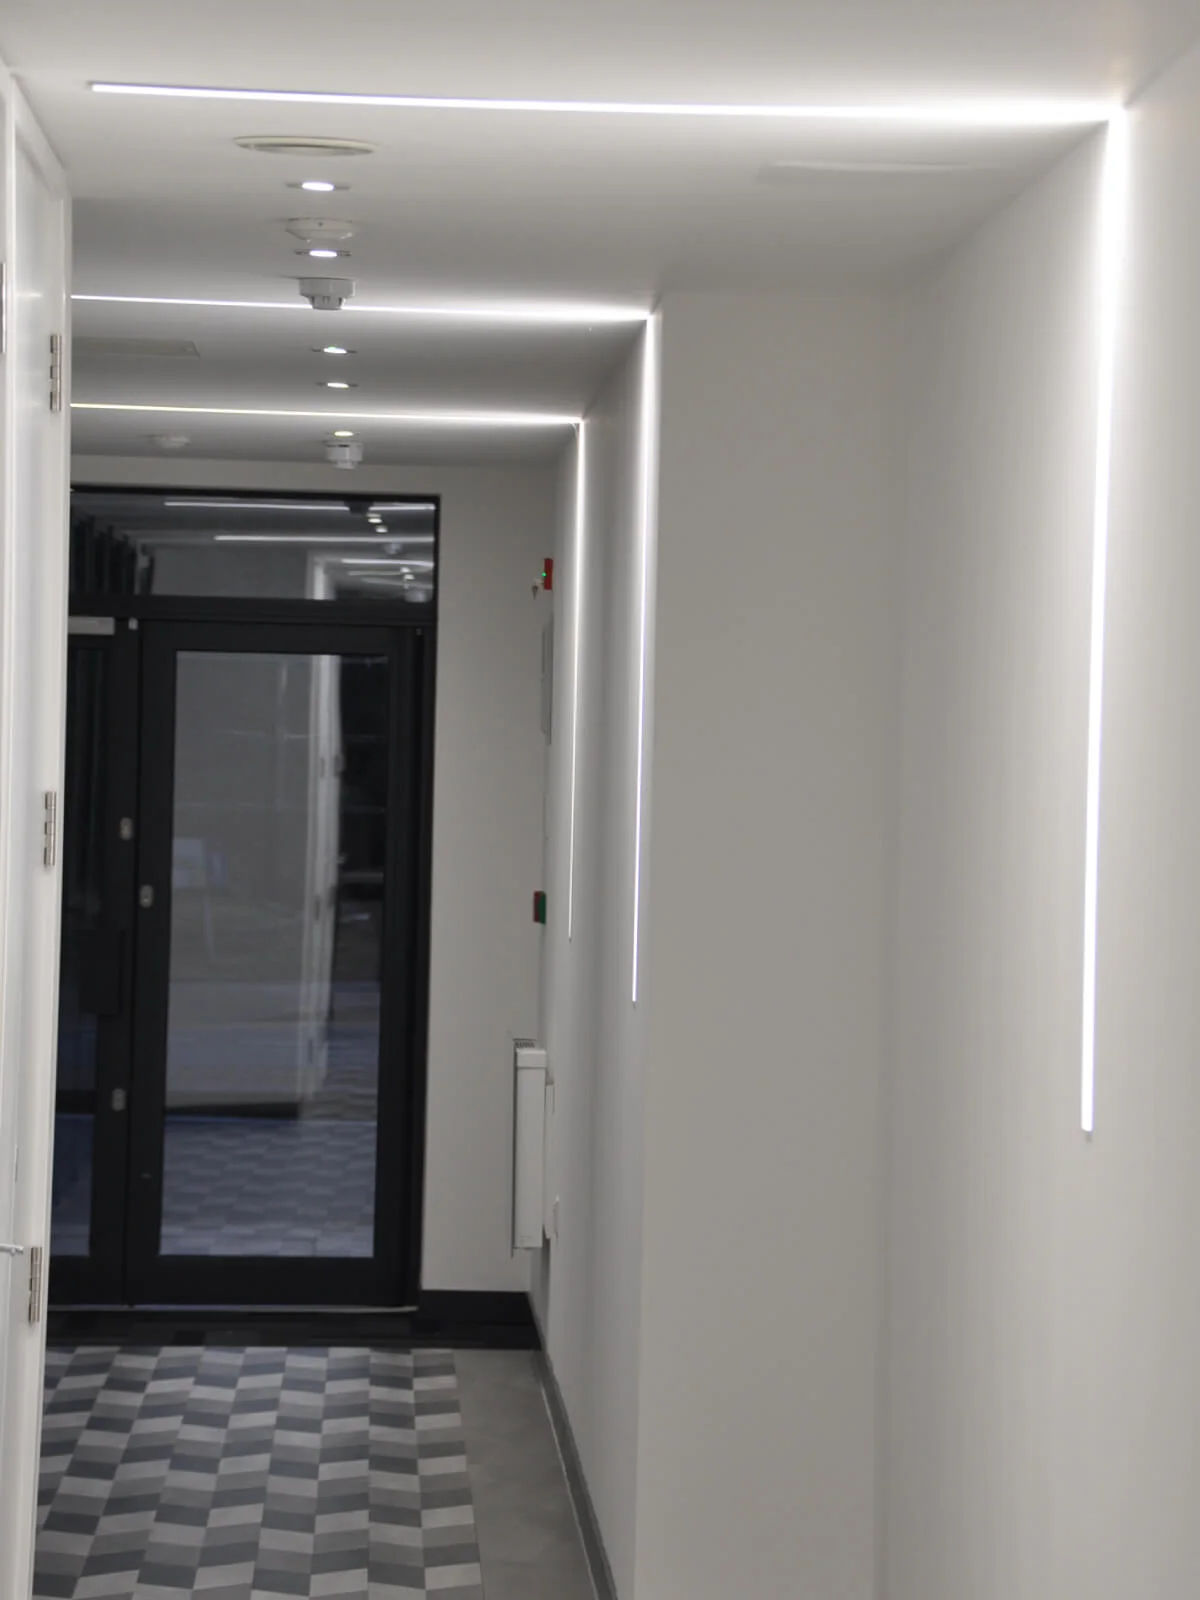 Office refurbishment with LED lights